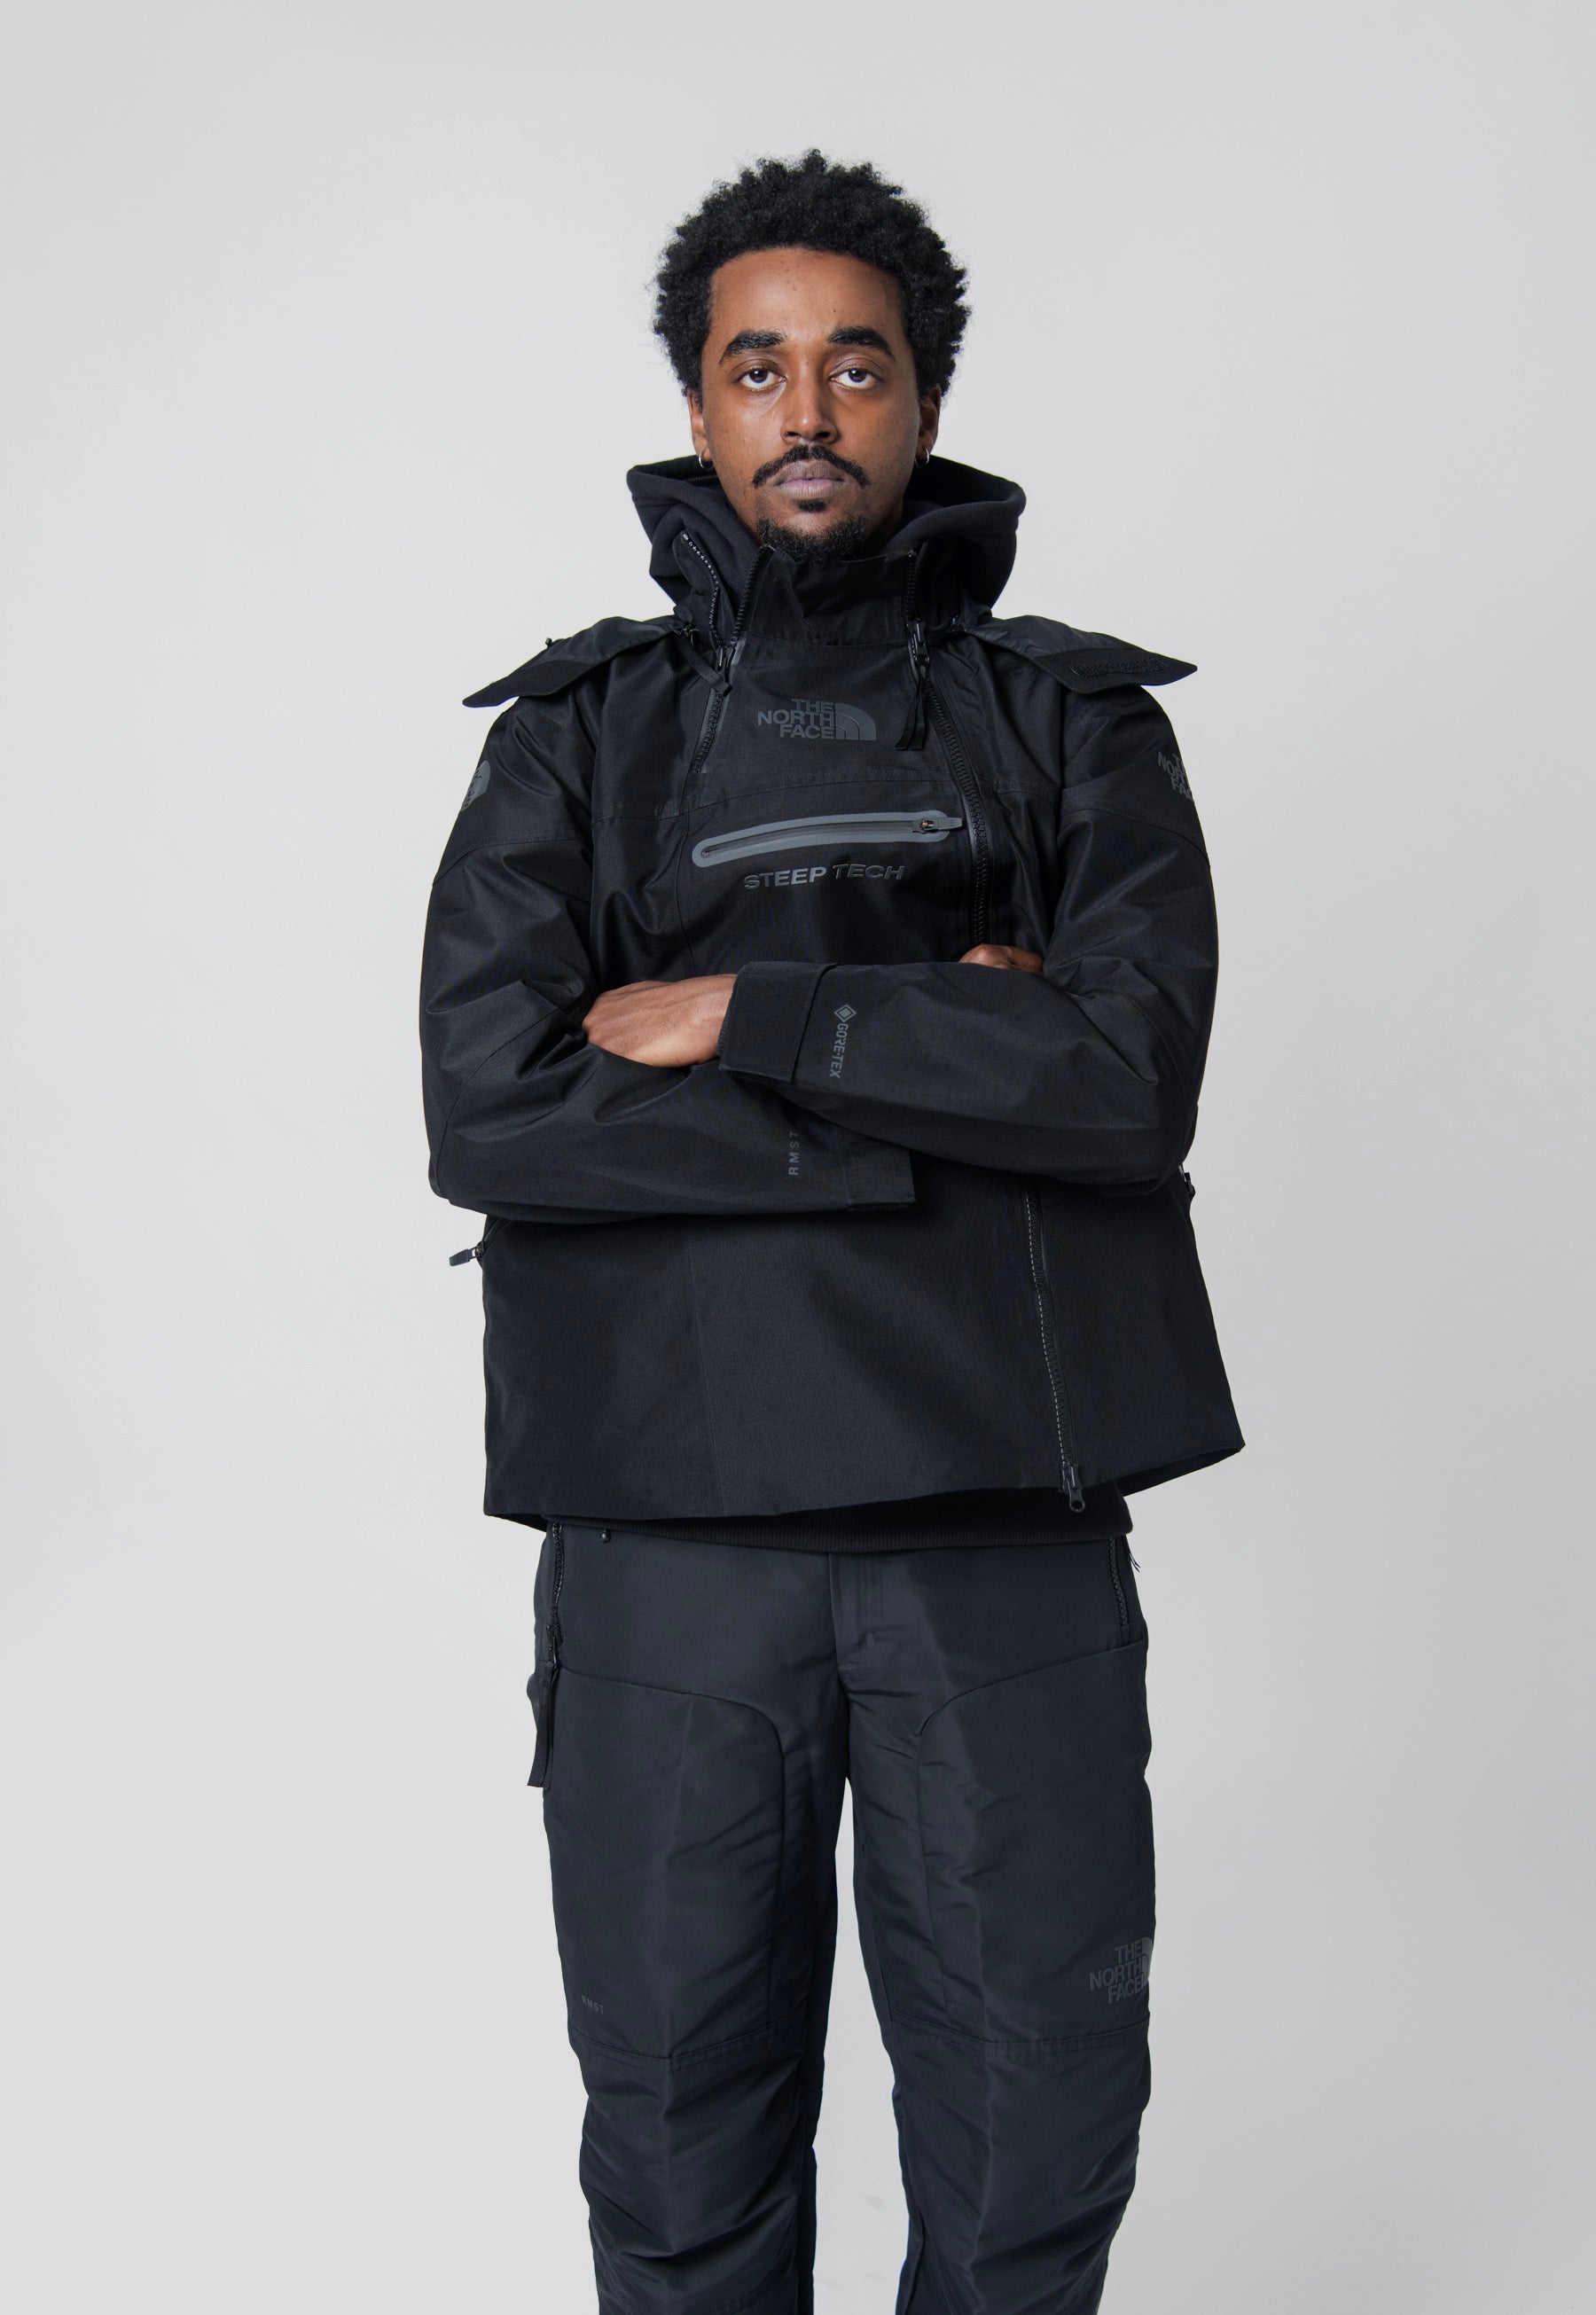 The North Face Men's Remastered Steep Tech Gore-Tex Work Jacket in